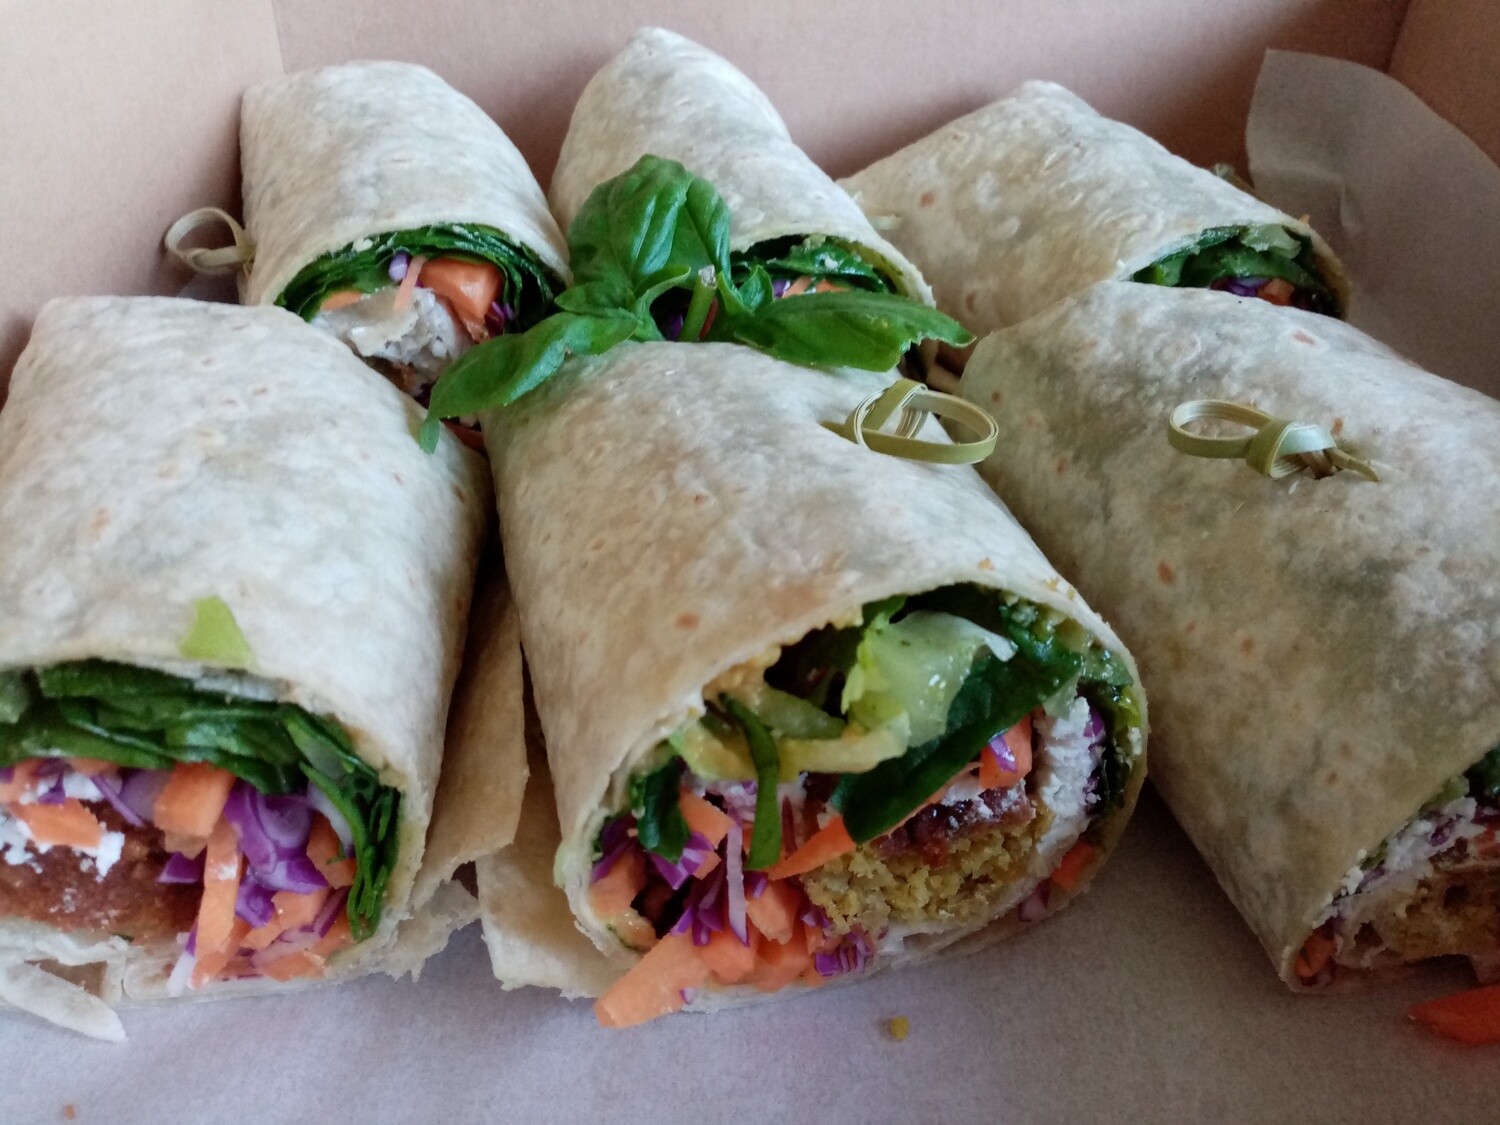 10x HALF WRAPS. Half wholemeal wraps filled with greens, carrot, red cabbage, feta, seasonal Hummus and wholegrain mustard. Your choice Falafel or Chicken.